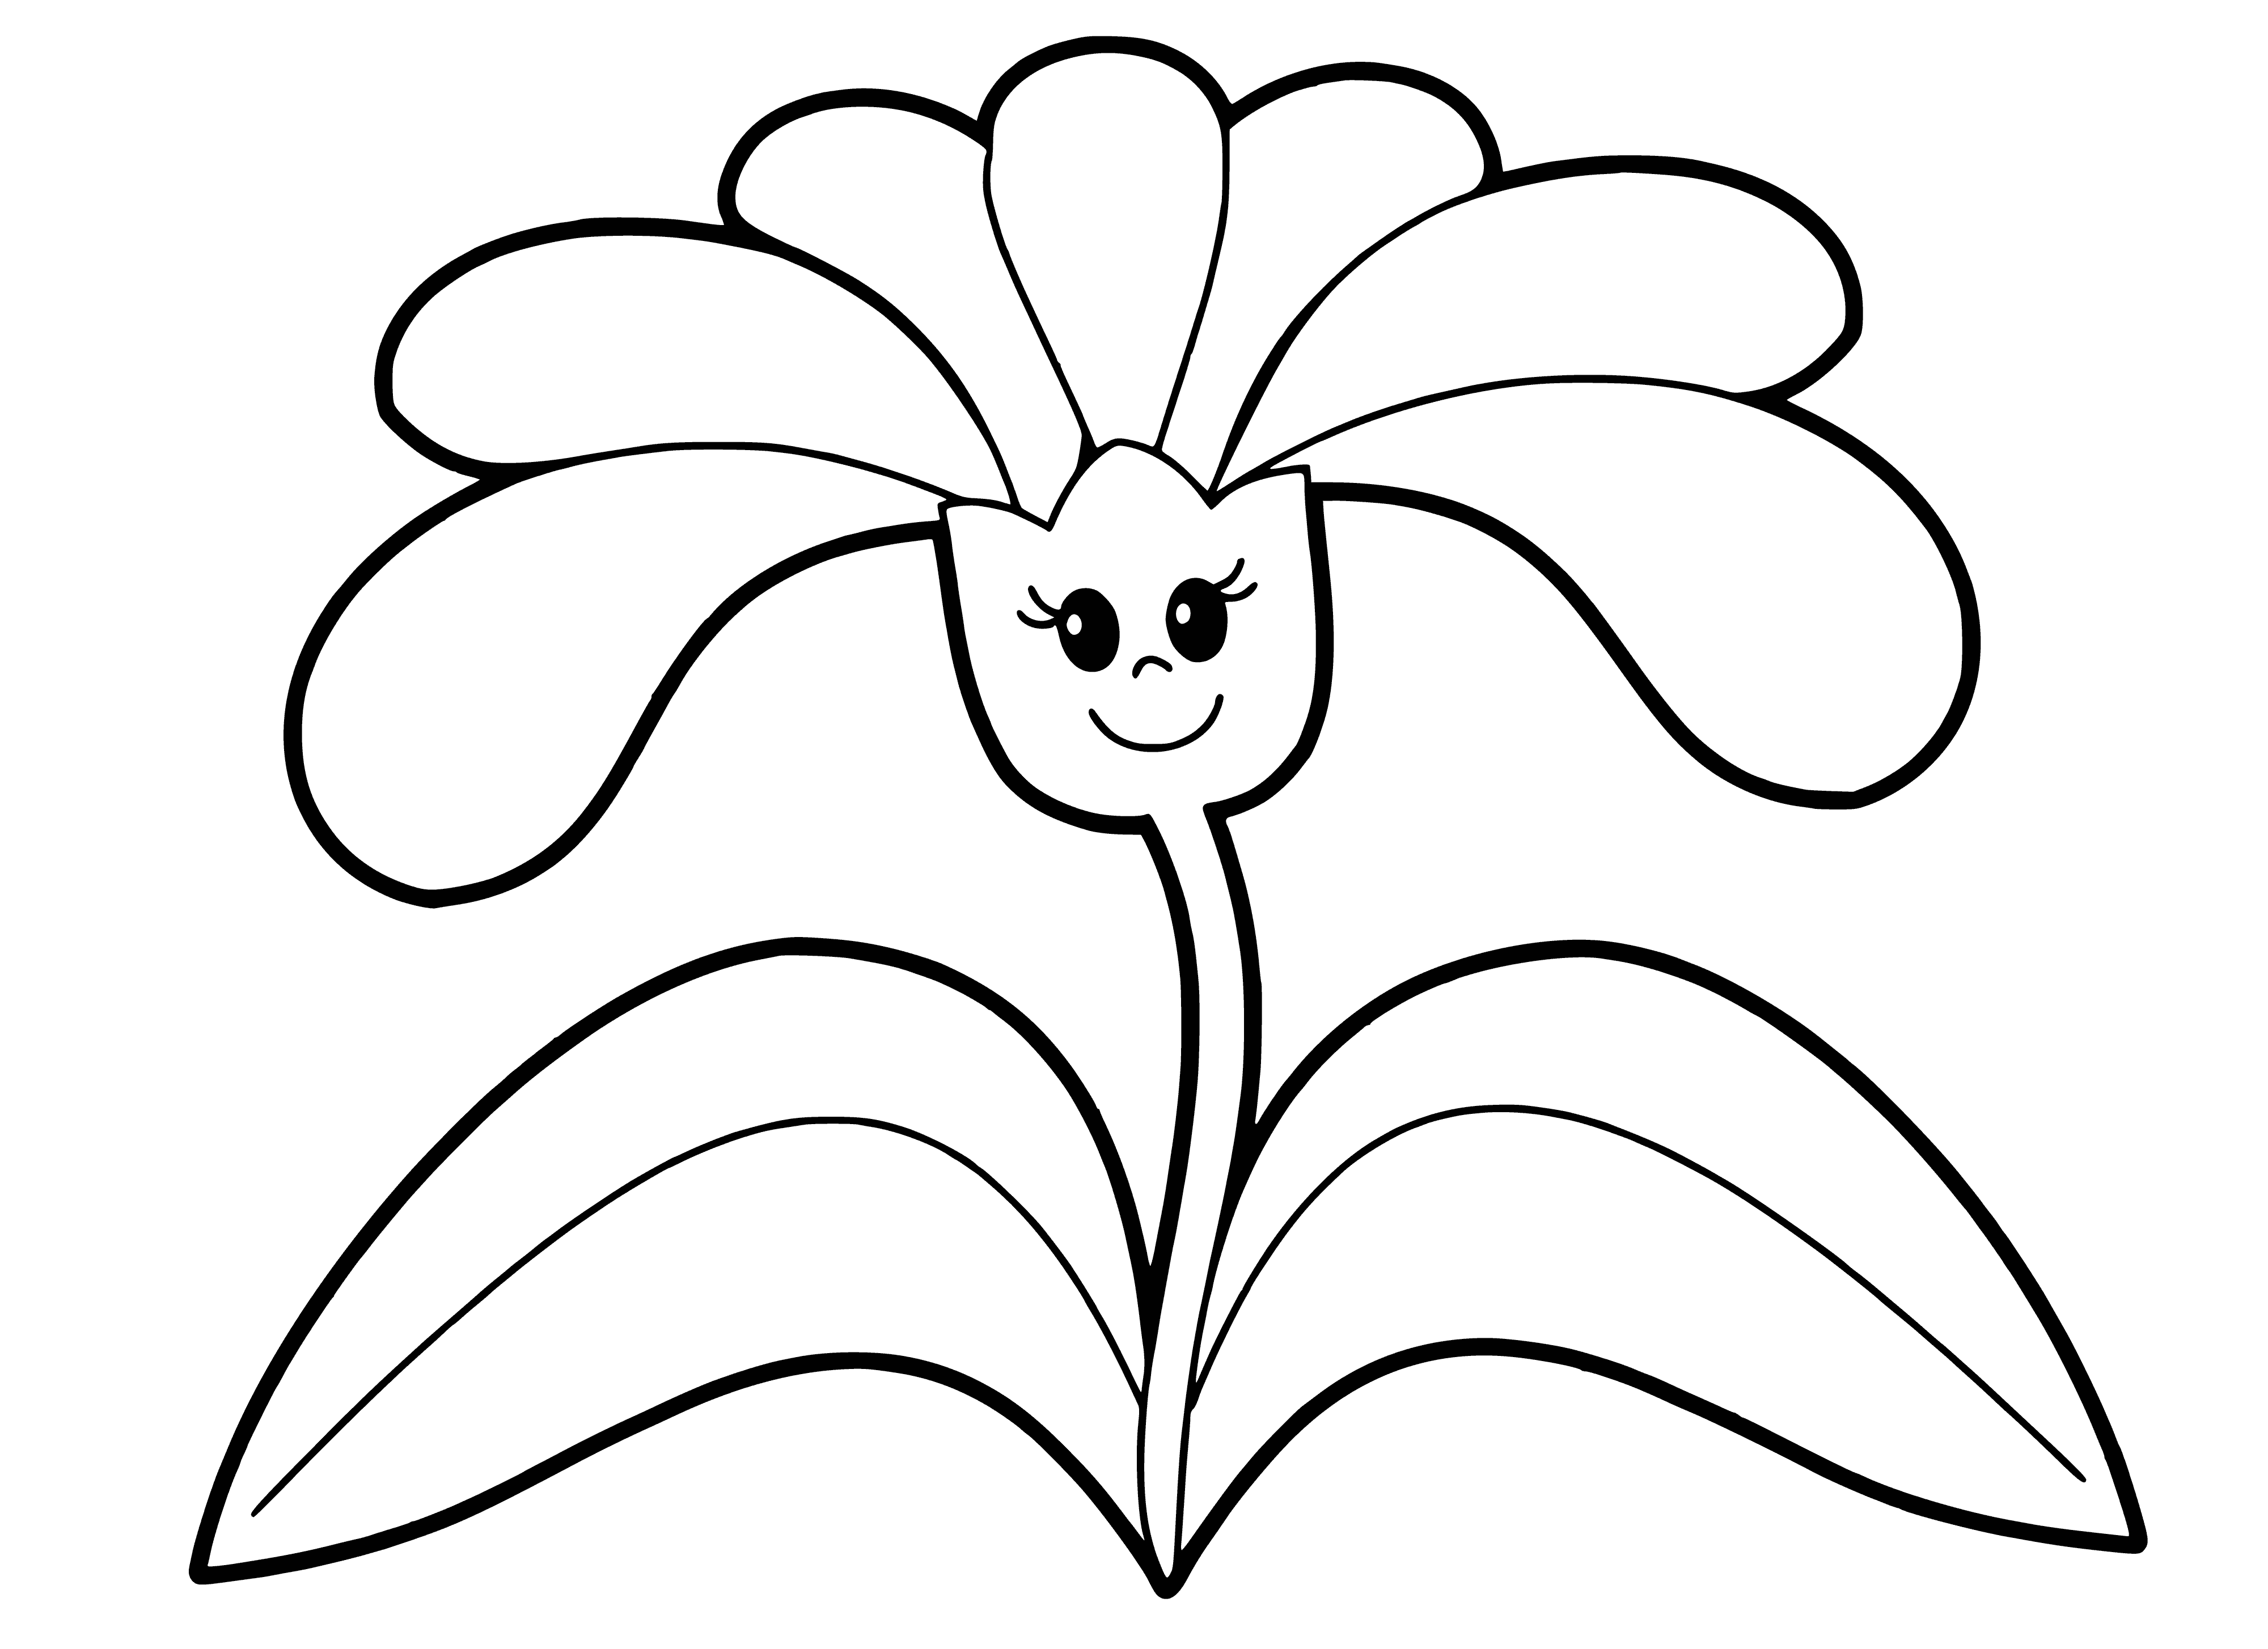 coloring page: 4 coloring pages of flowers (2 bouquets, daisy, rainbow rose) w/words "Happy," "Love," "Live," & "Forever" at bottom.